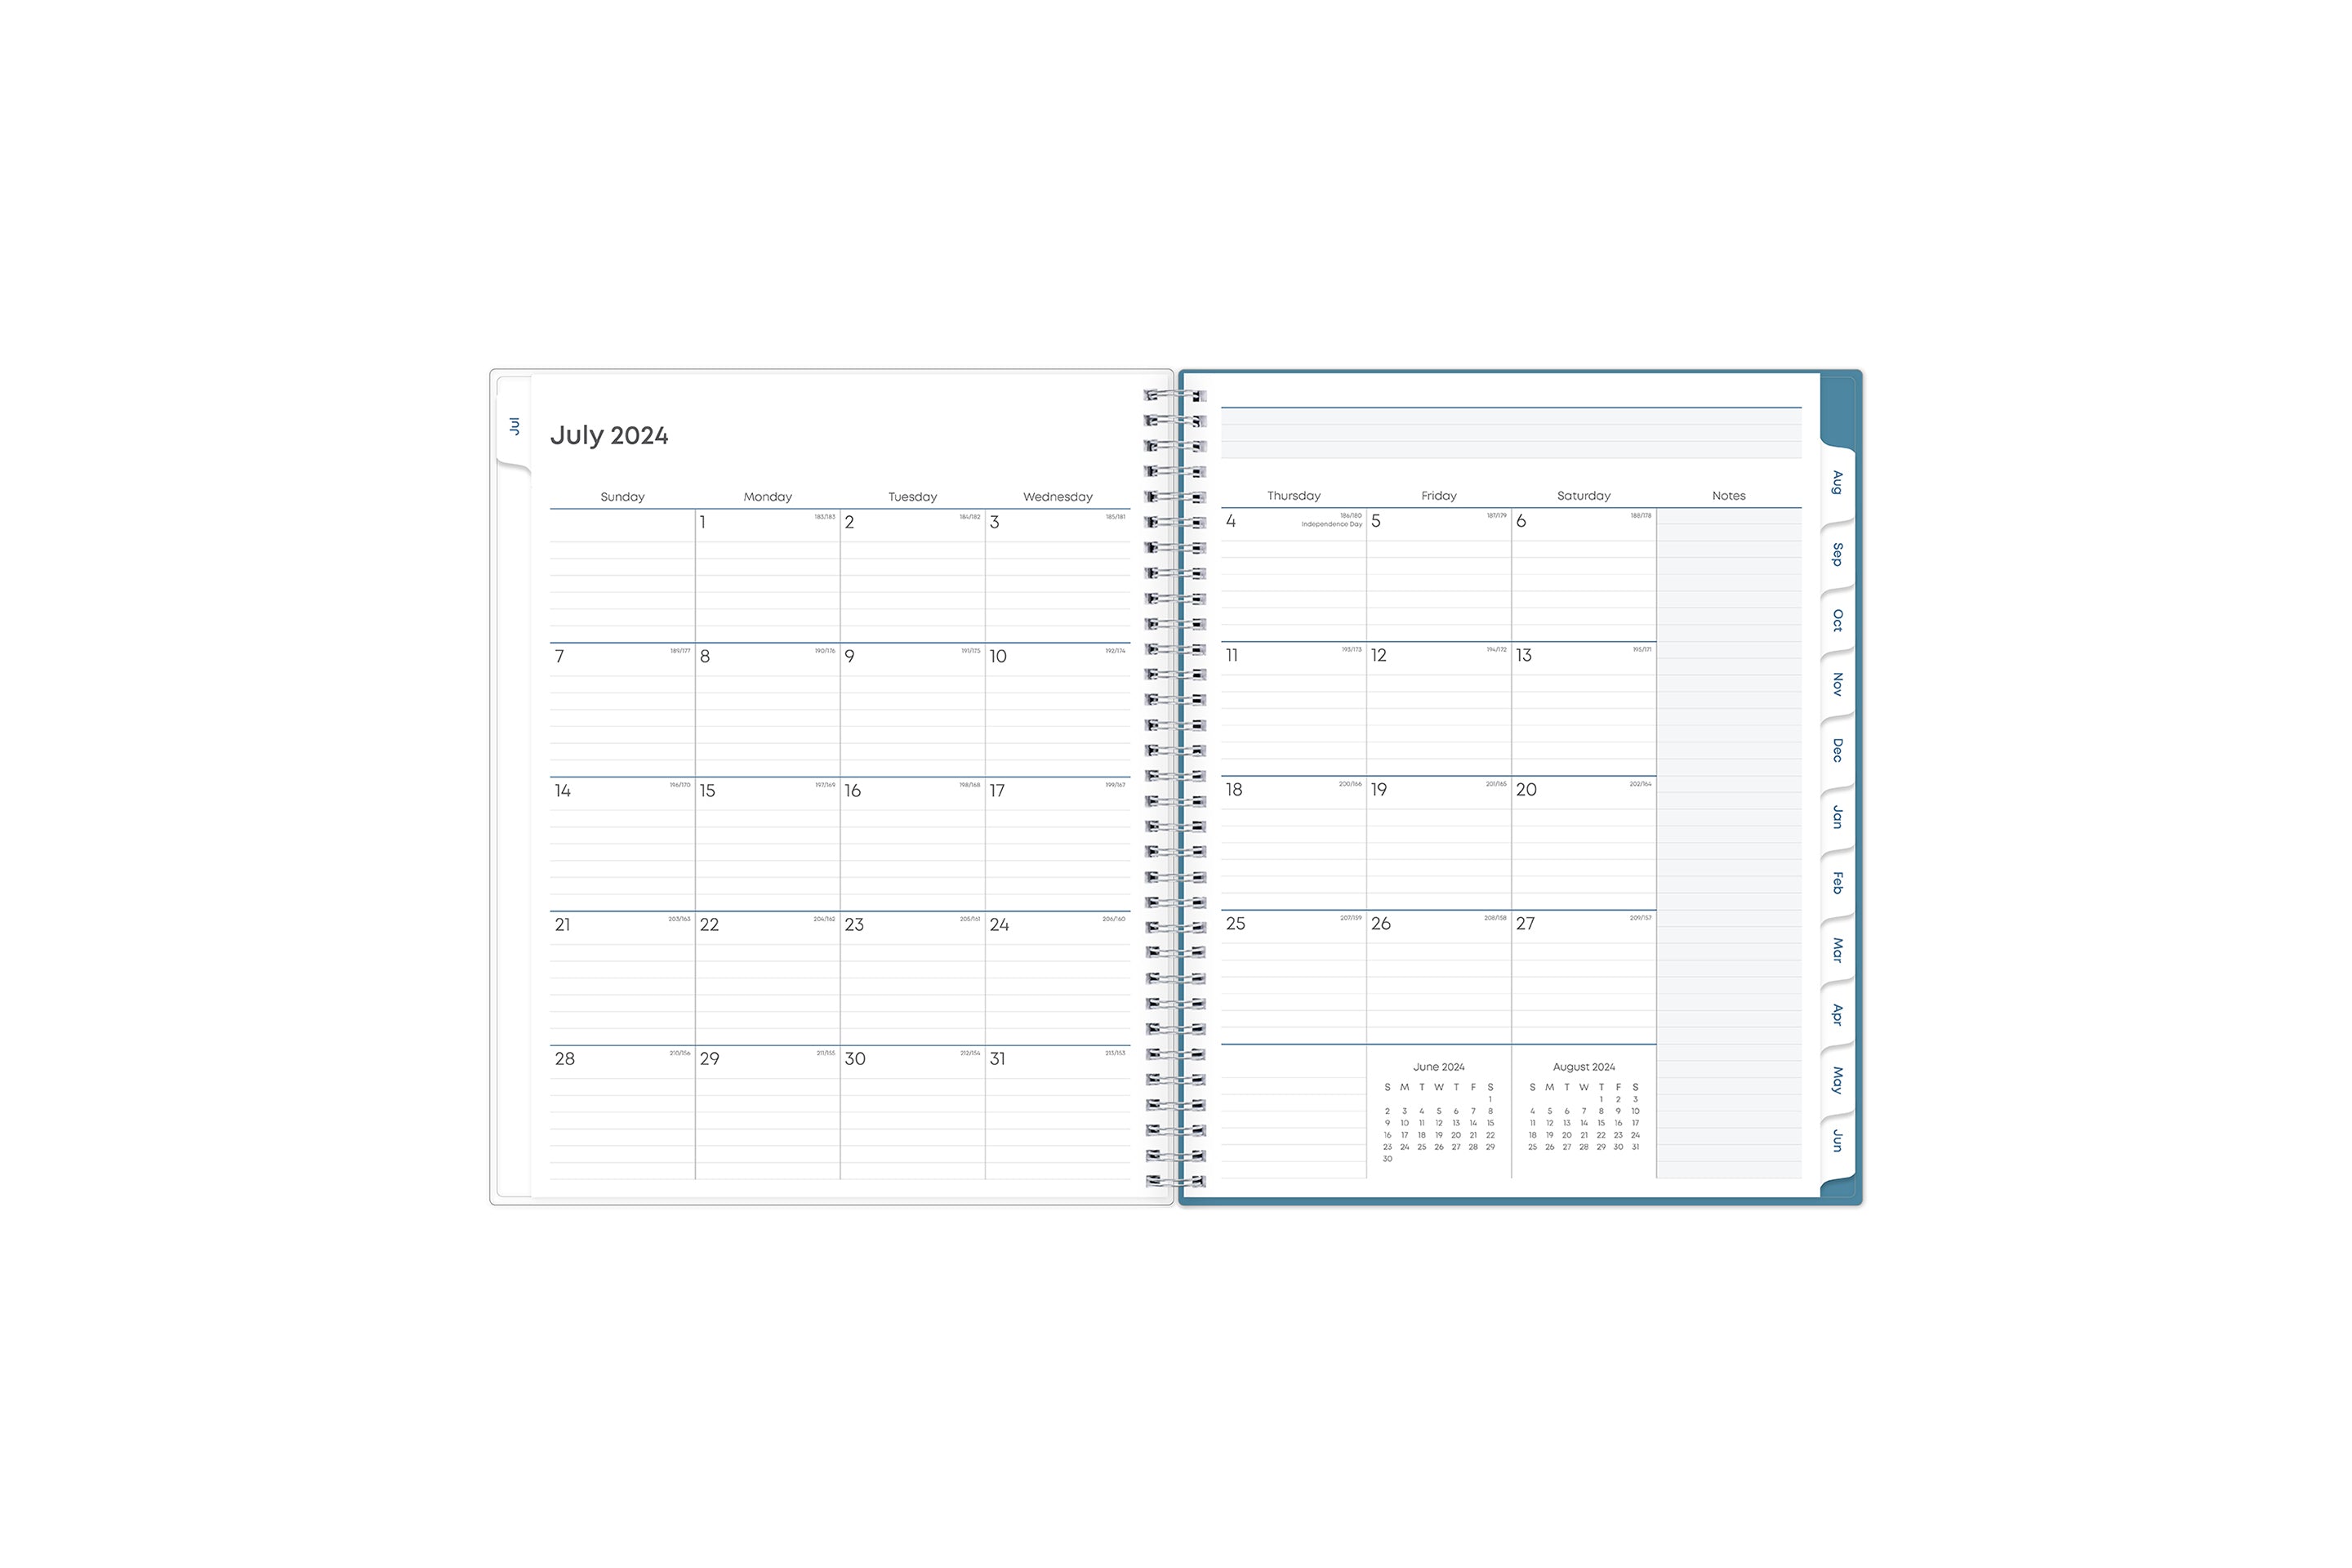 teacher lesson planner monthly view featuring ample lined writing space for projects, field trips, goals, deadlines, notes section, reference calendars and mint green monthly tabs in 8.5x11 size